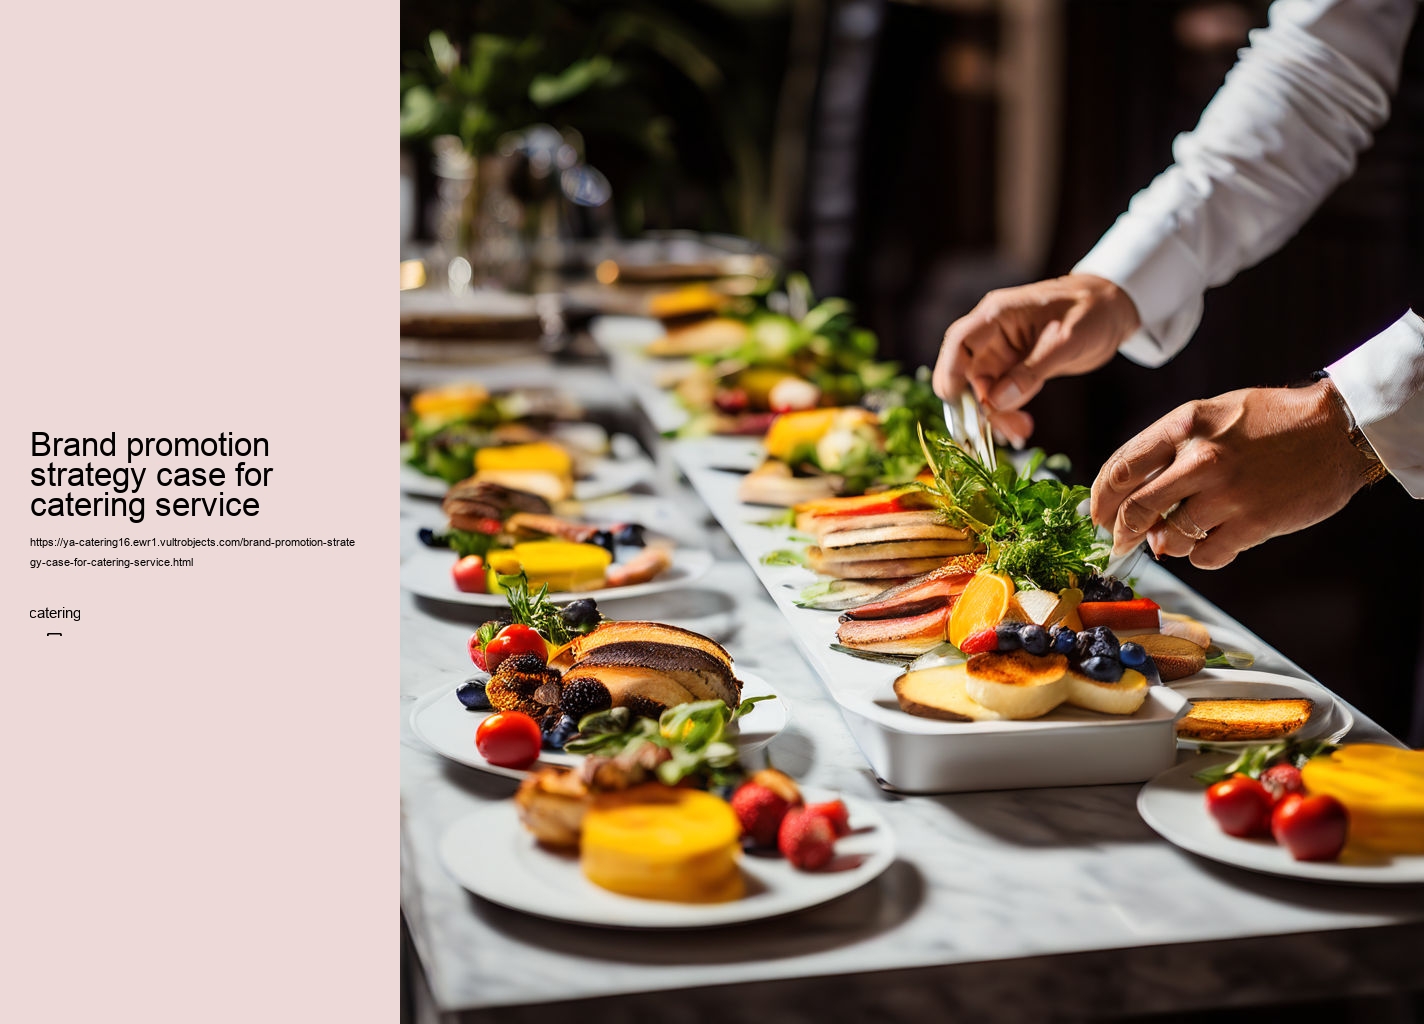 Brand promotion strategy case for catering service